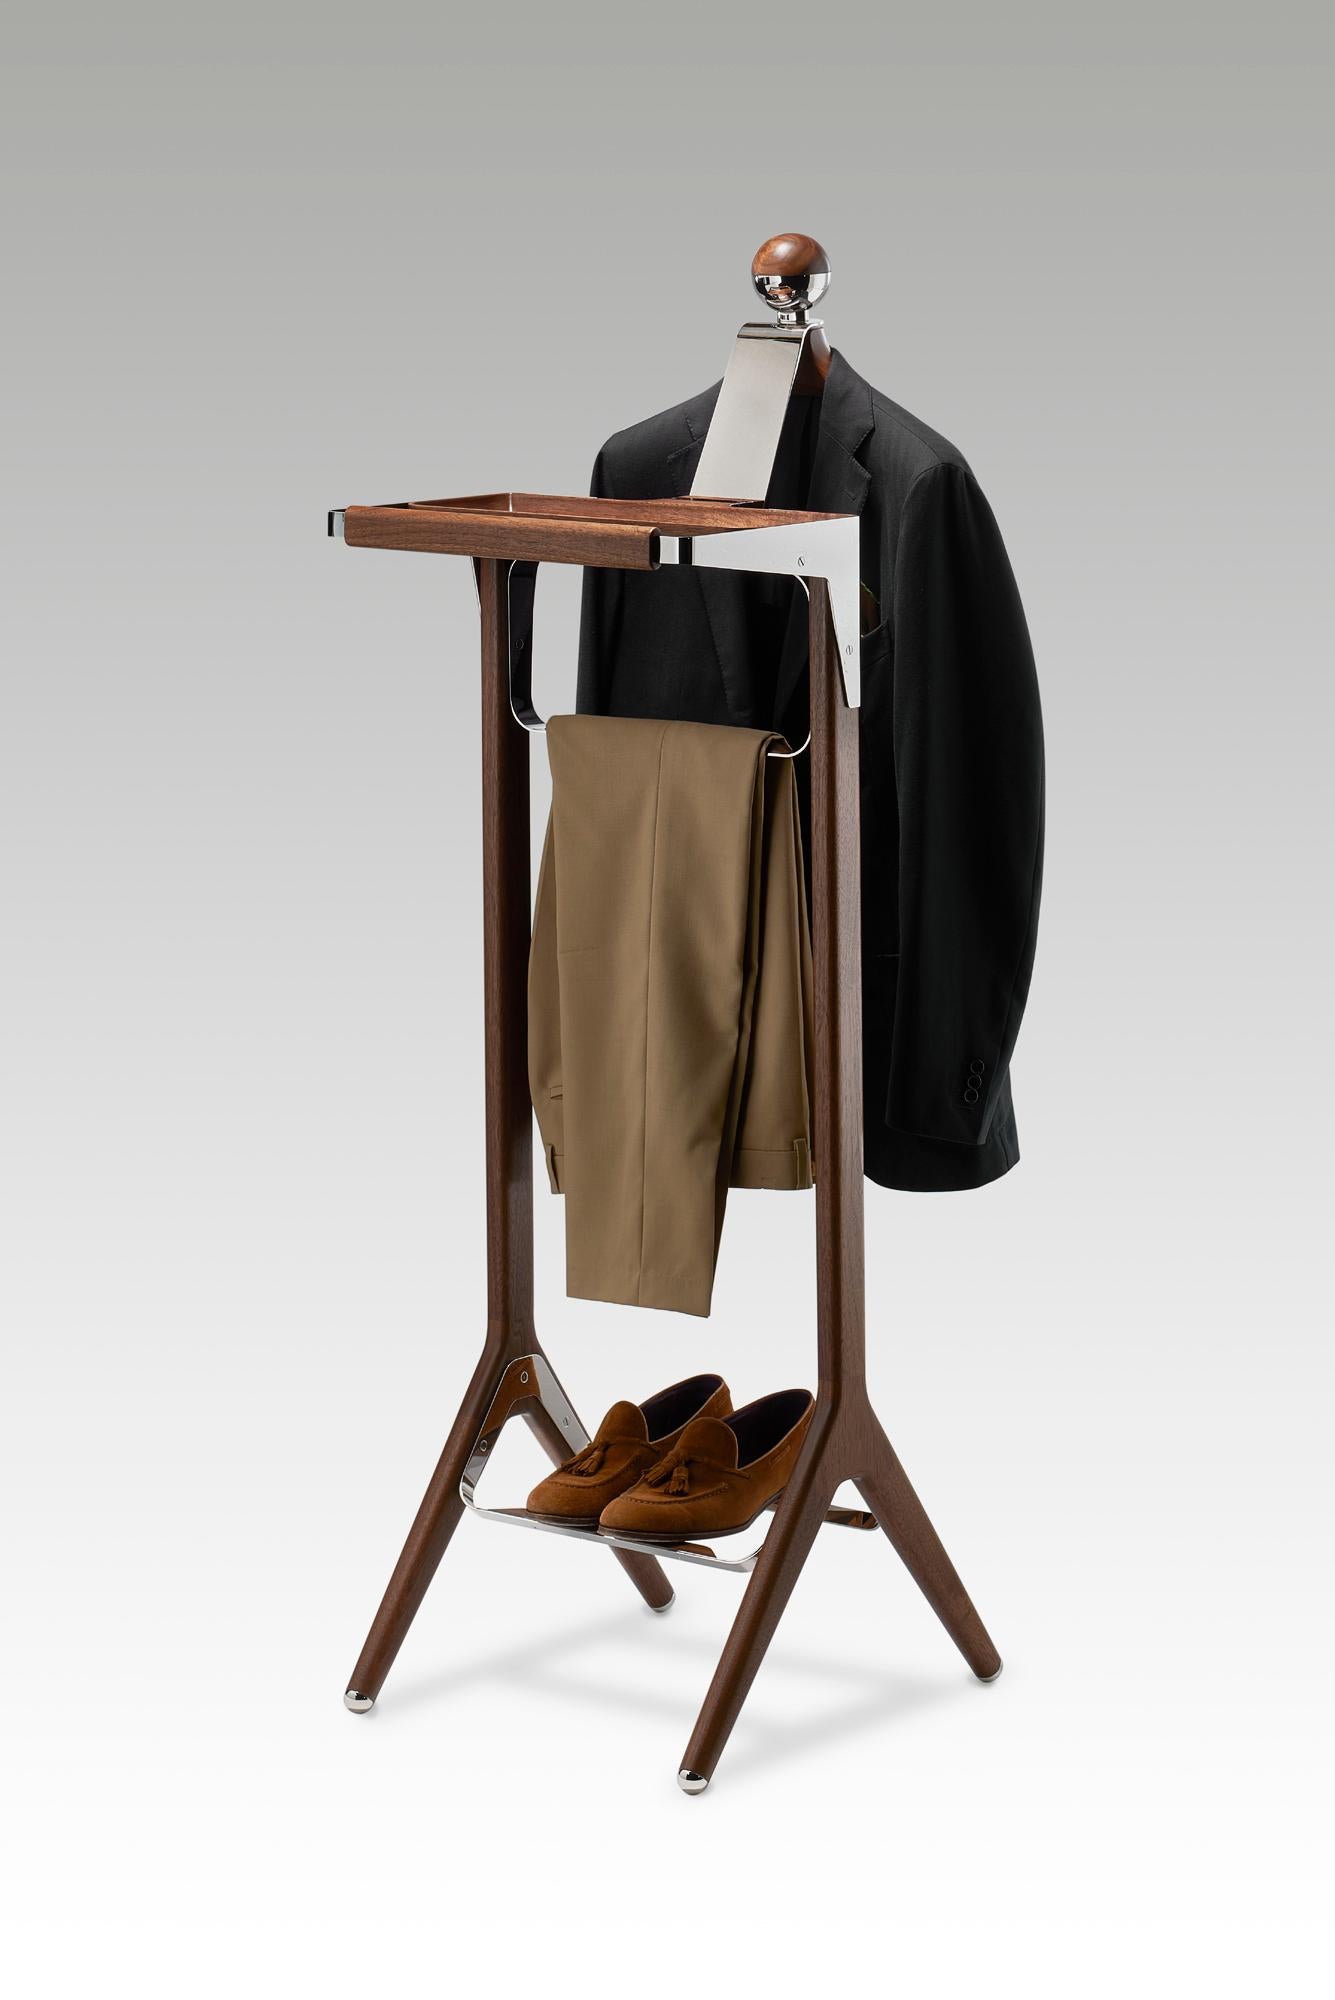 Through exclusive attention to detail this stylish gentleman's valet stand is a manifestation of cohesion between British master craftsmanship and classical design to celebrate the passion we share with you for the highest quality sartorial